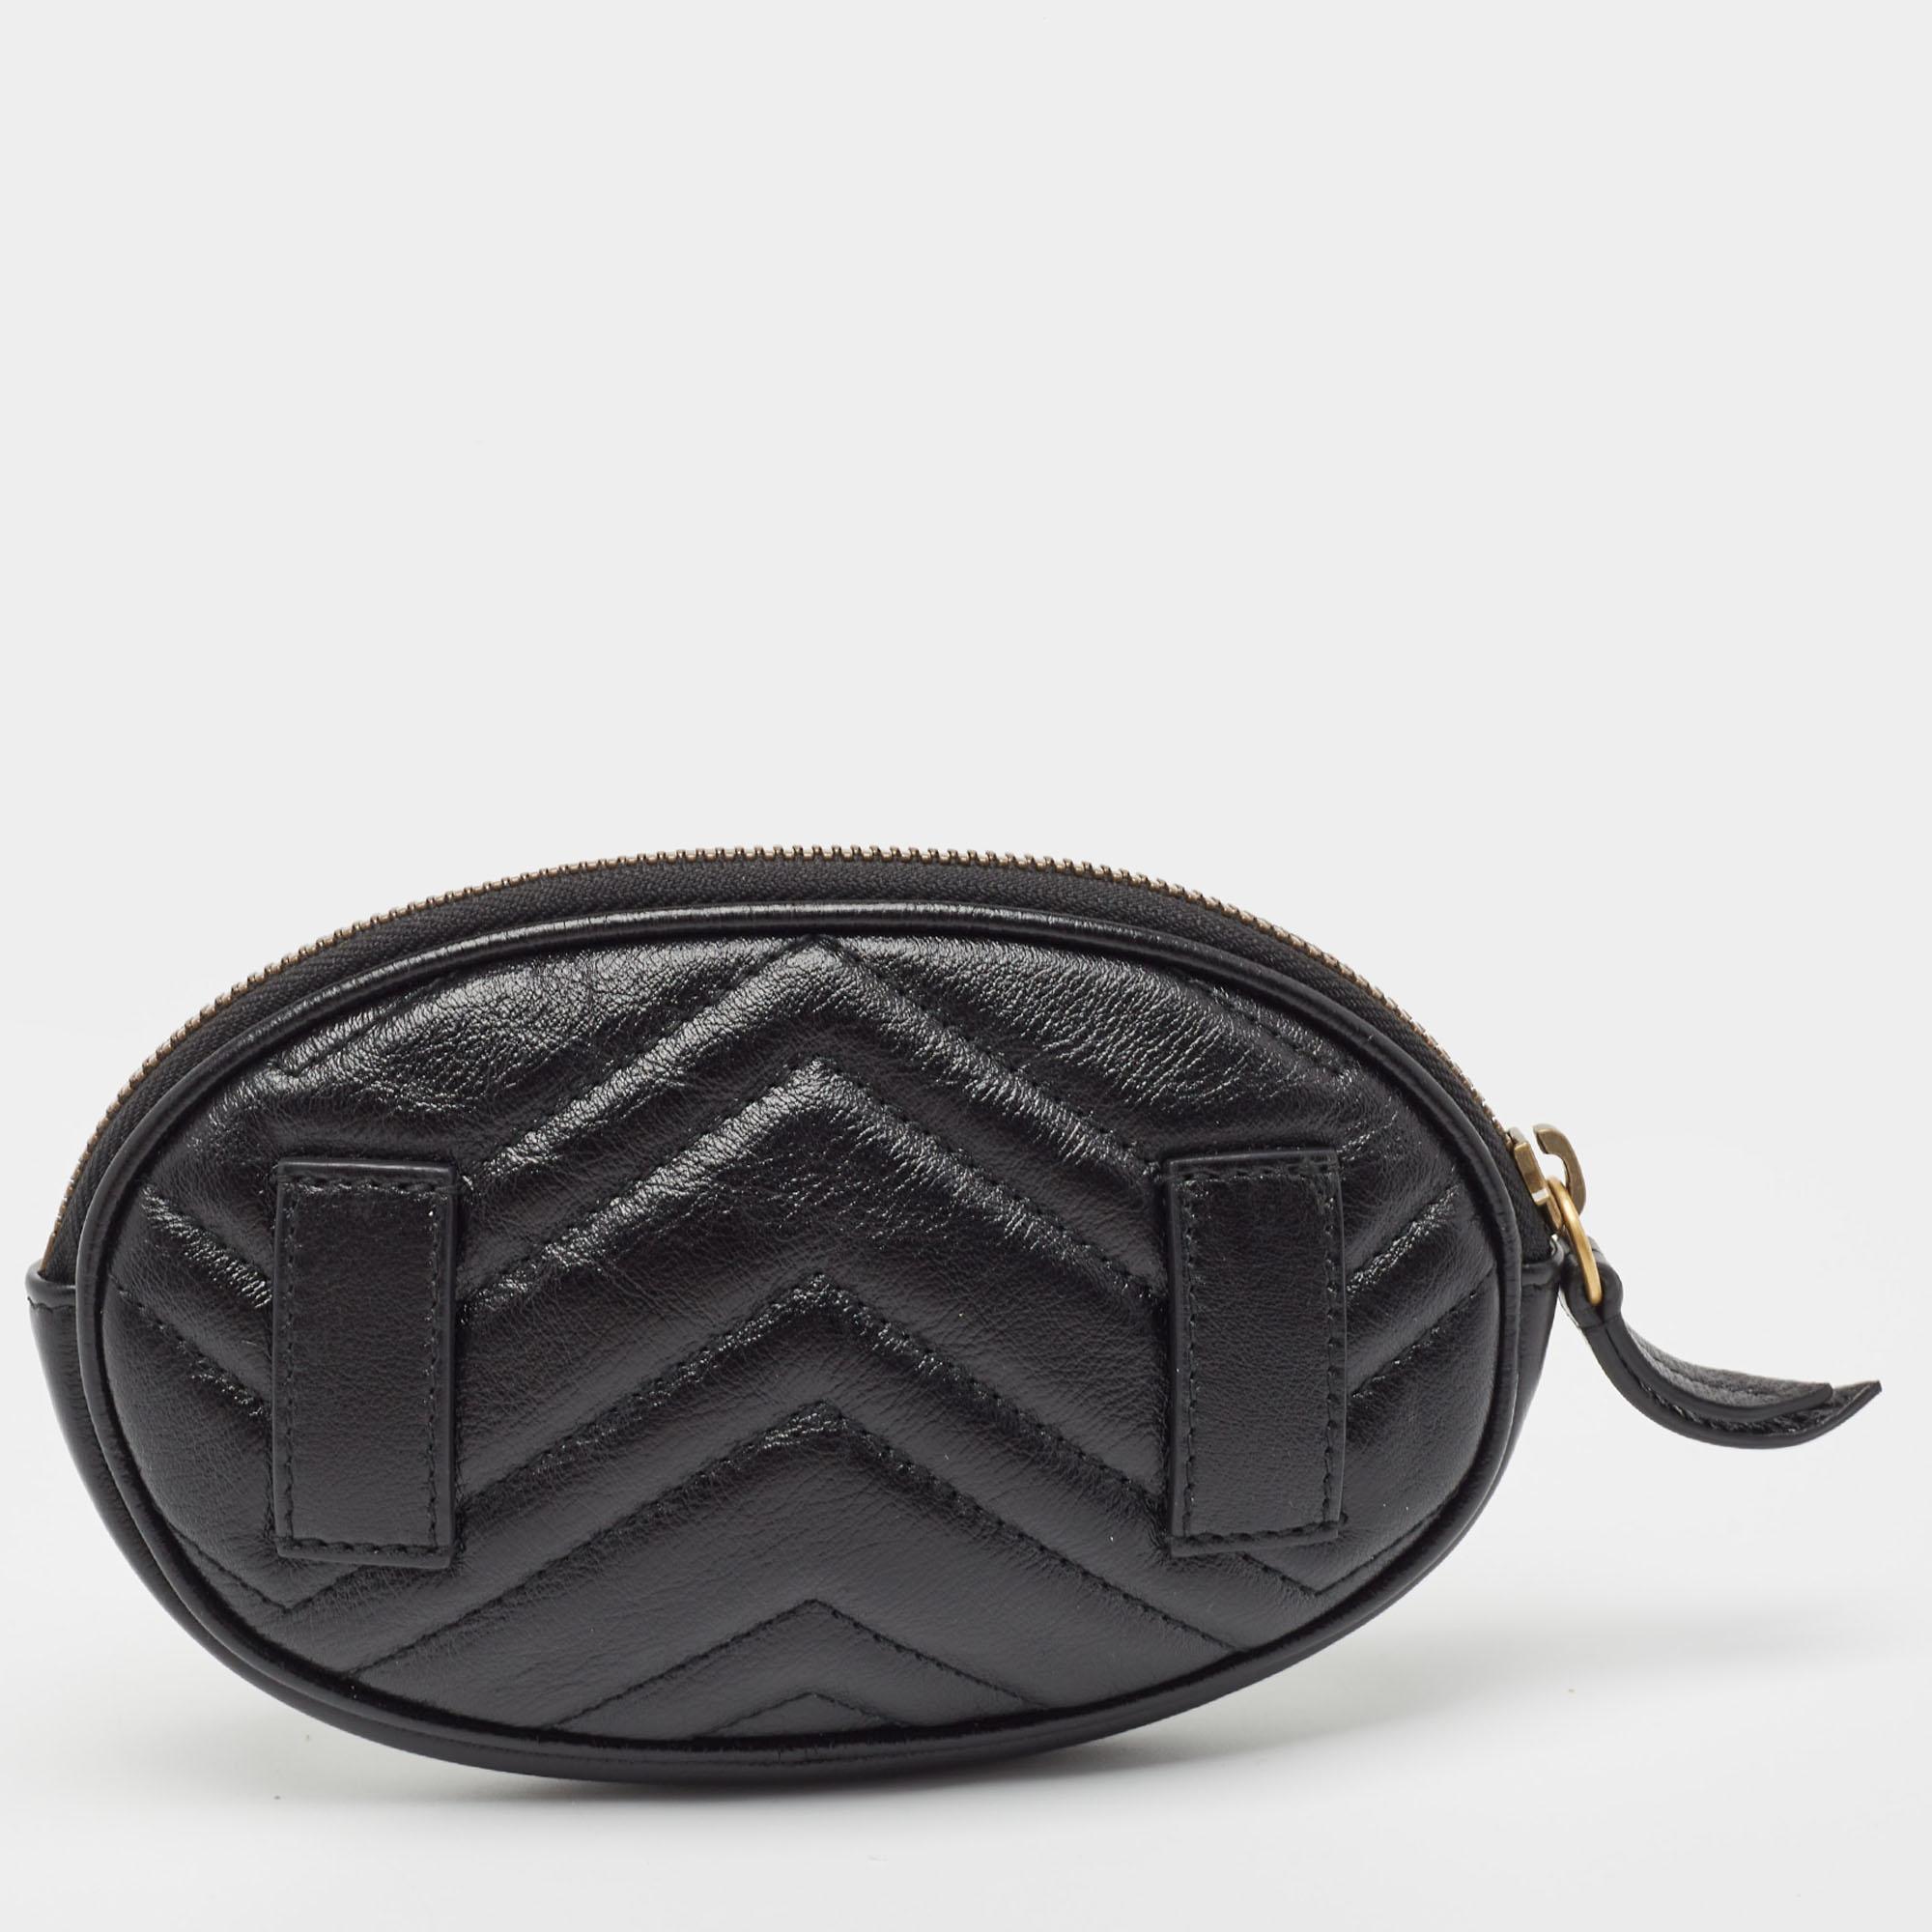 The Gucci pouch exudes elegance with its sleek black leather adorned with the iconic GG logo. Its compact yet functional design makes it perfect for carrying essentials with style. This luxurious accessory seamlessly merges fashion and practicality,